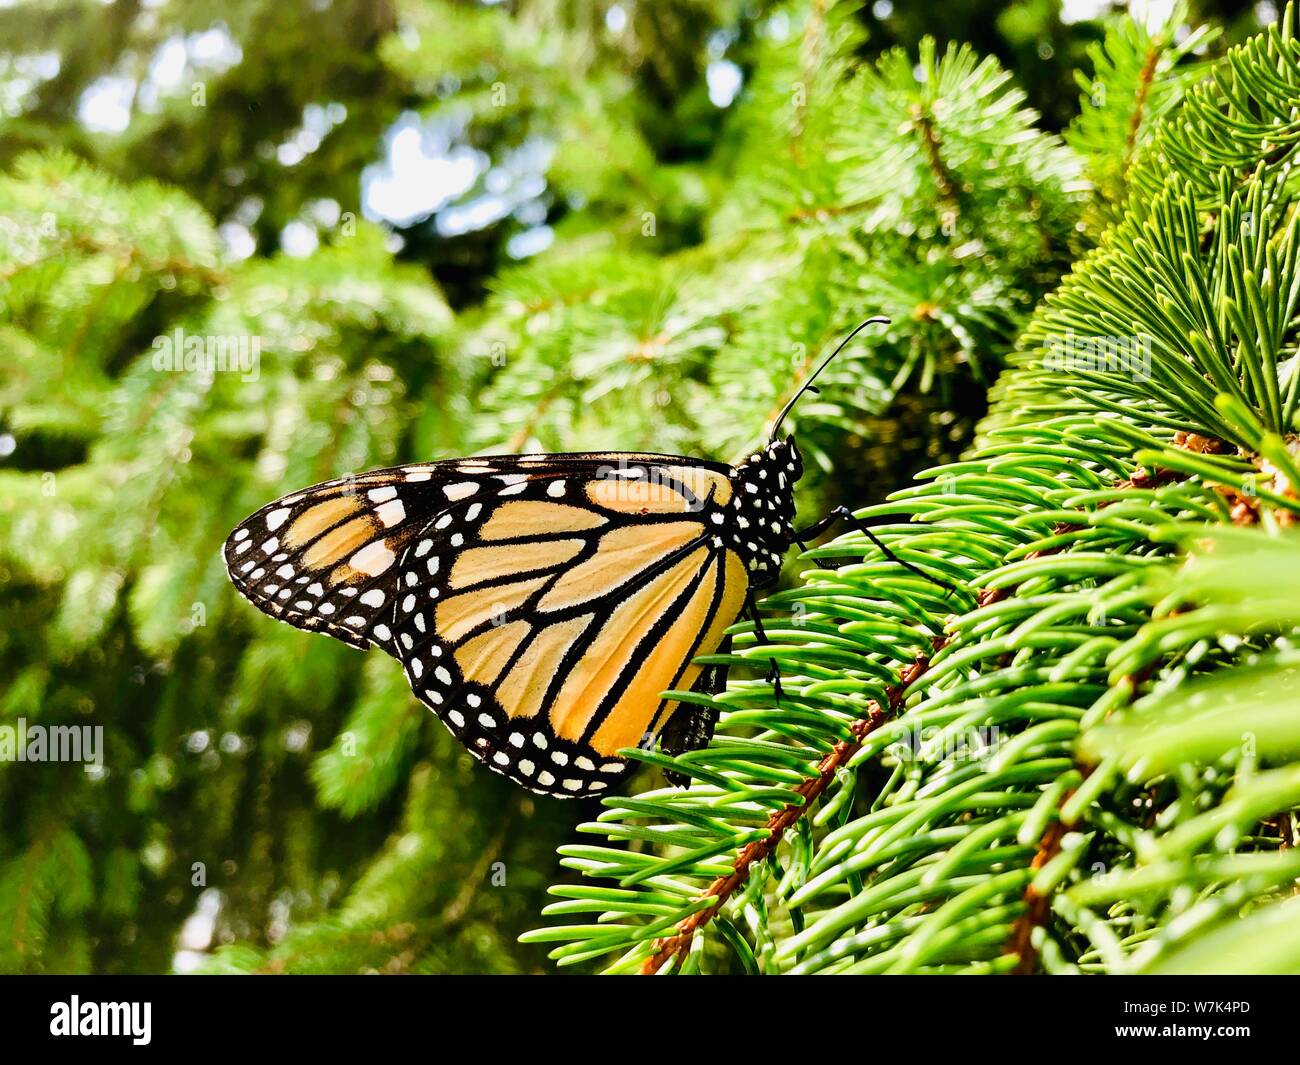 Monarch Butterfly close up orange and black flying animal Stock Photo